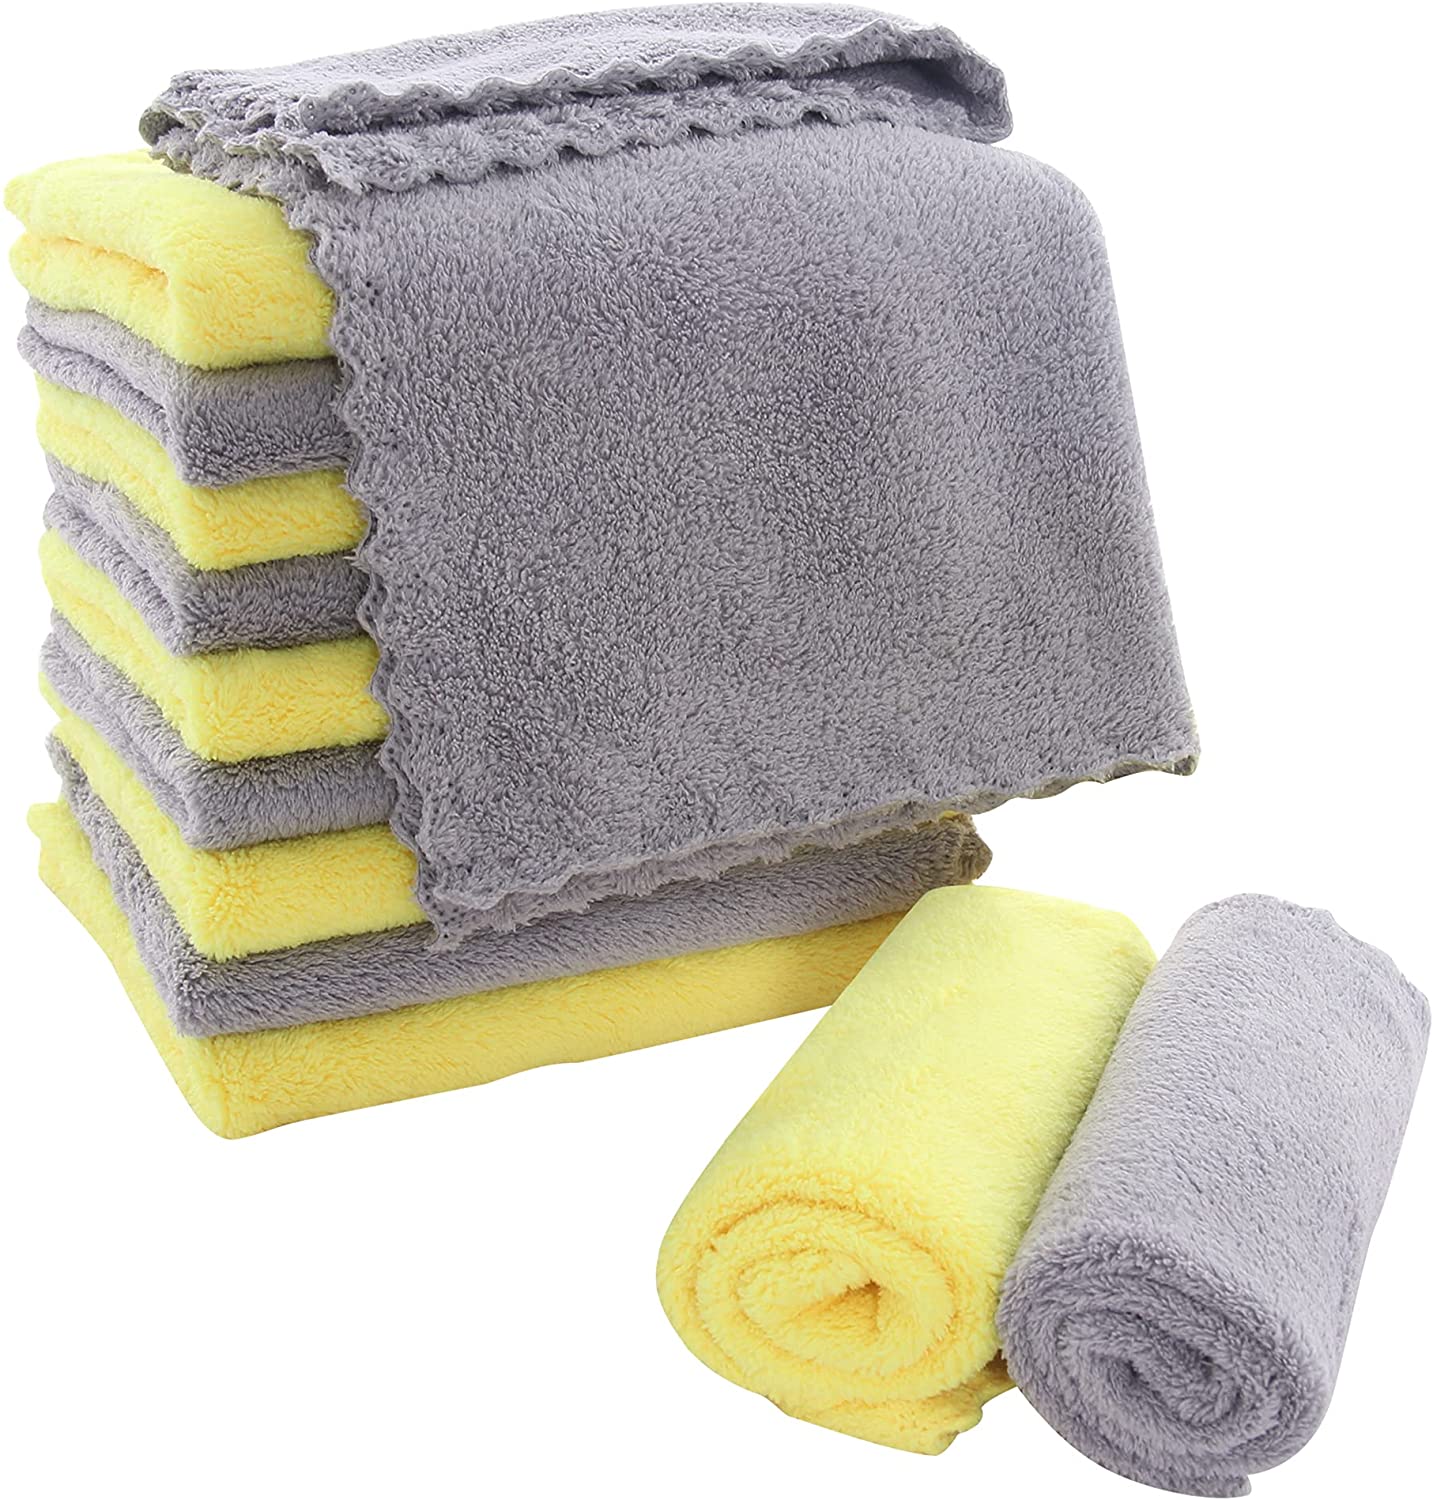 MOONQUEEN Microfiber Cleaning Cloth - 12 Pack Kitchen Dish Towels, 12 x 12  inch - Extra Absorbent and Soft Wash Rag - Lint Free Dust and Dirty  Cleaning Supplies for Kitchen and Car 